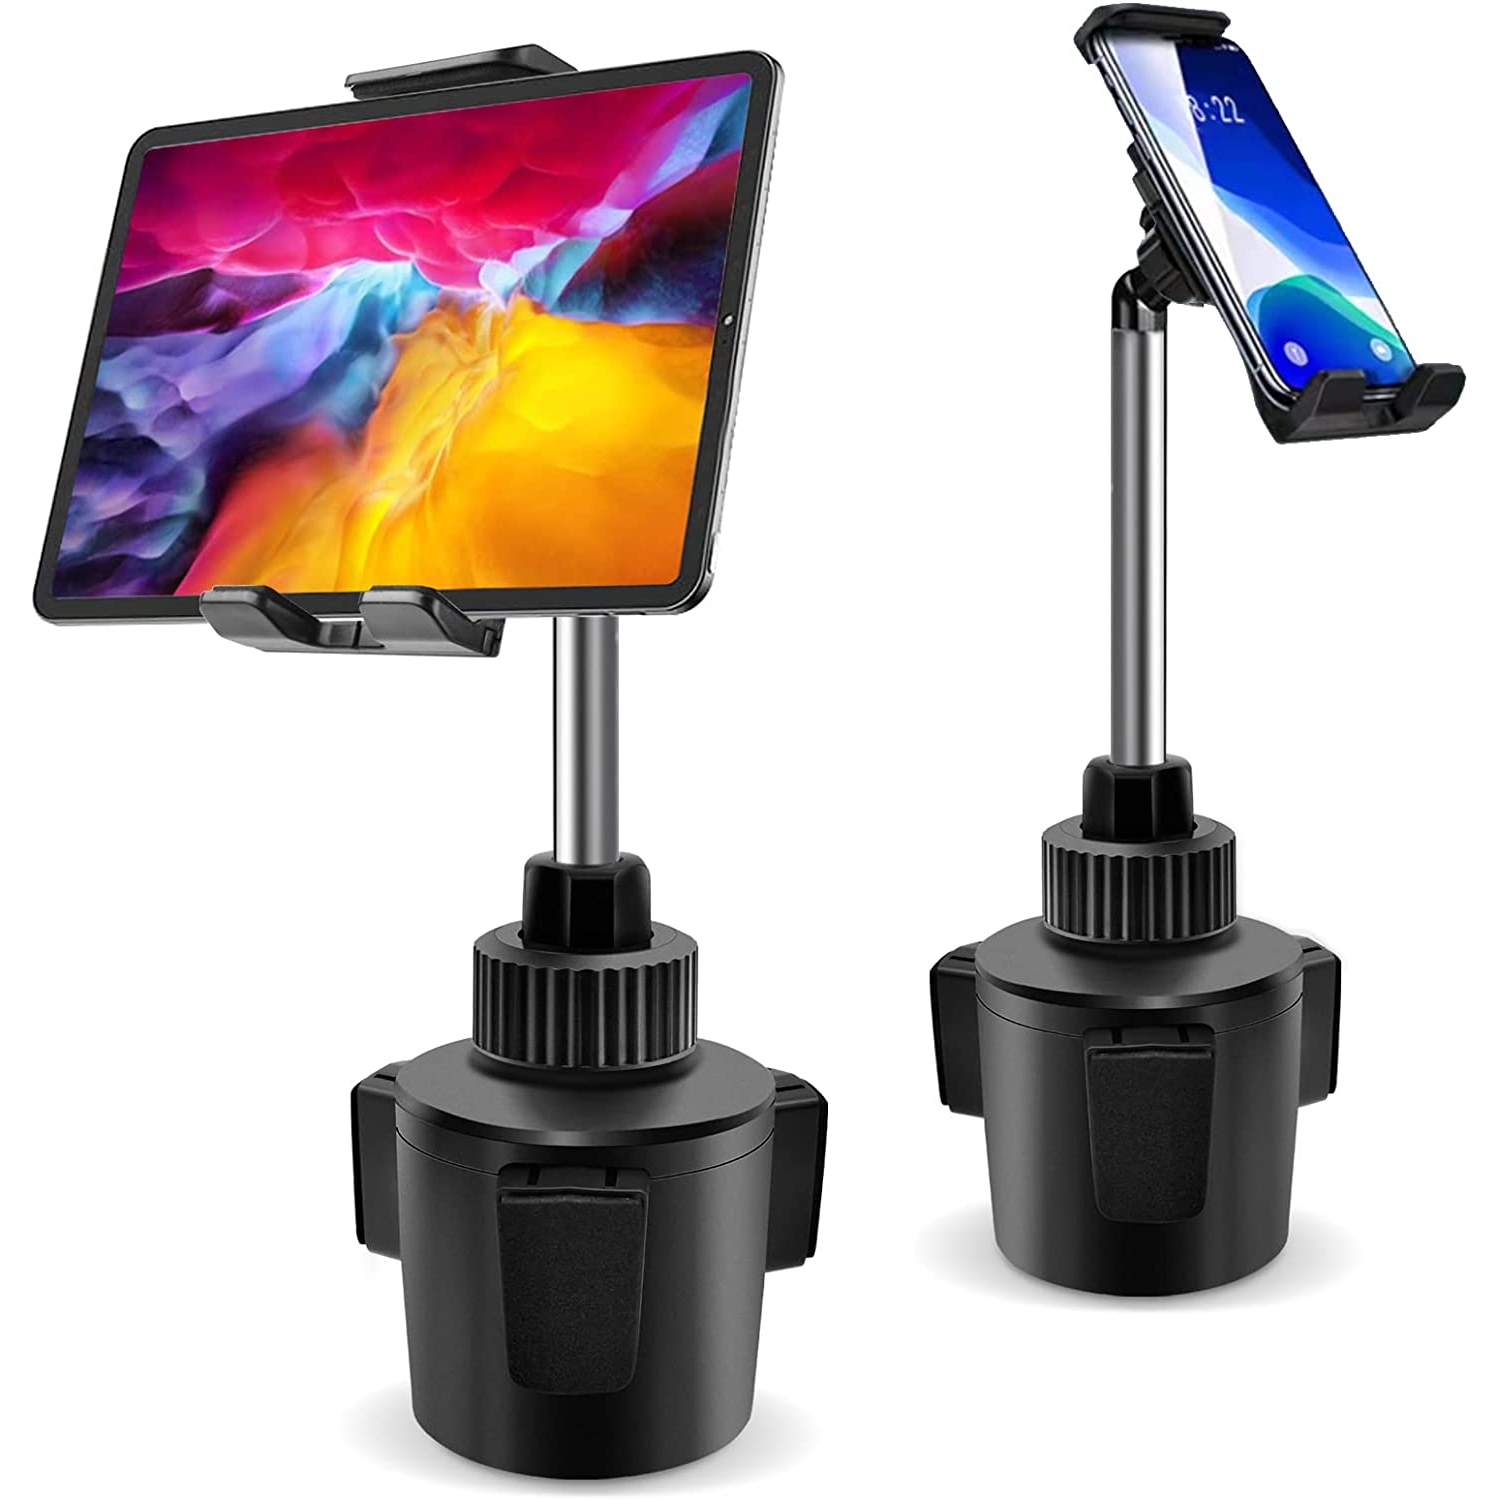 Tablet Car Mount for iPad, iPad Pro Car Holder, Cup Holder Tablet Mount for Car Truck Vehicle Heavy Duty Car Cradle Stand with Extendable Neck for iPad Air Mini Pro Kindle Samsung